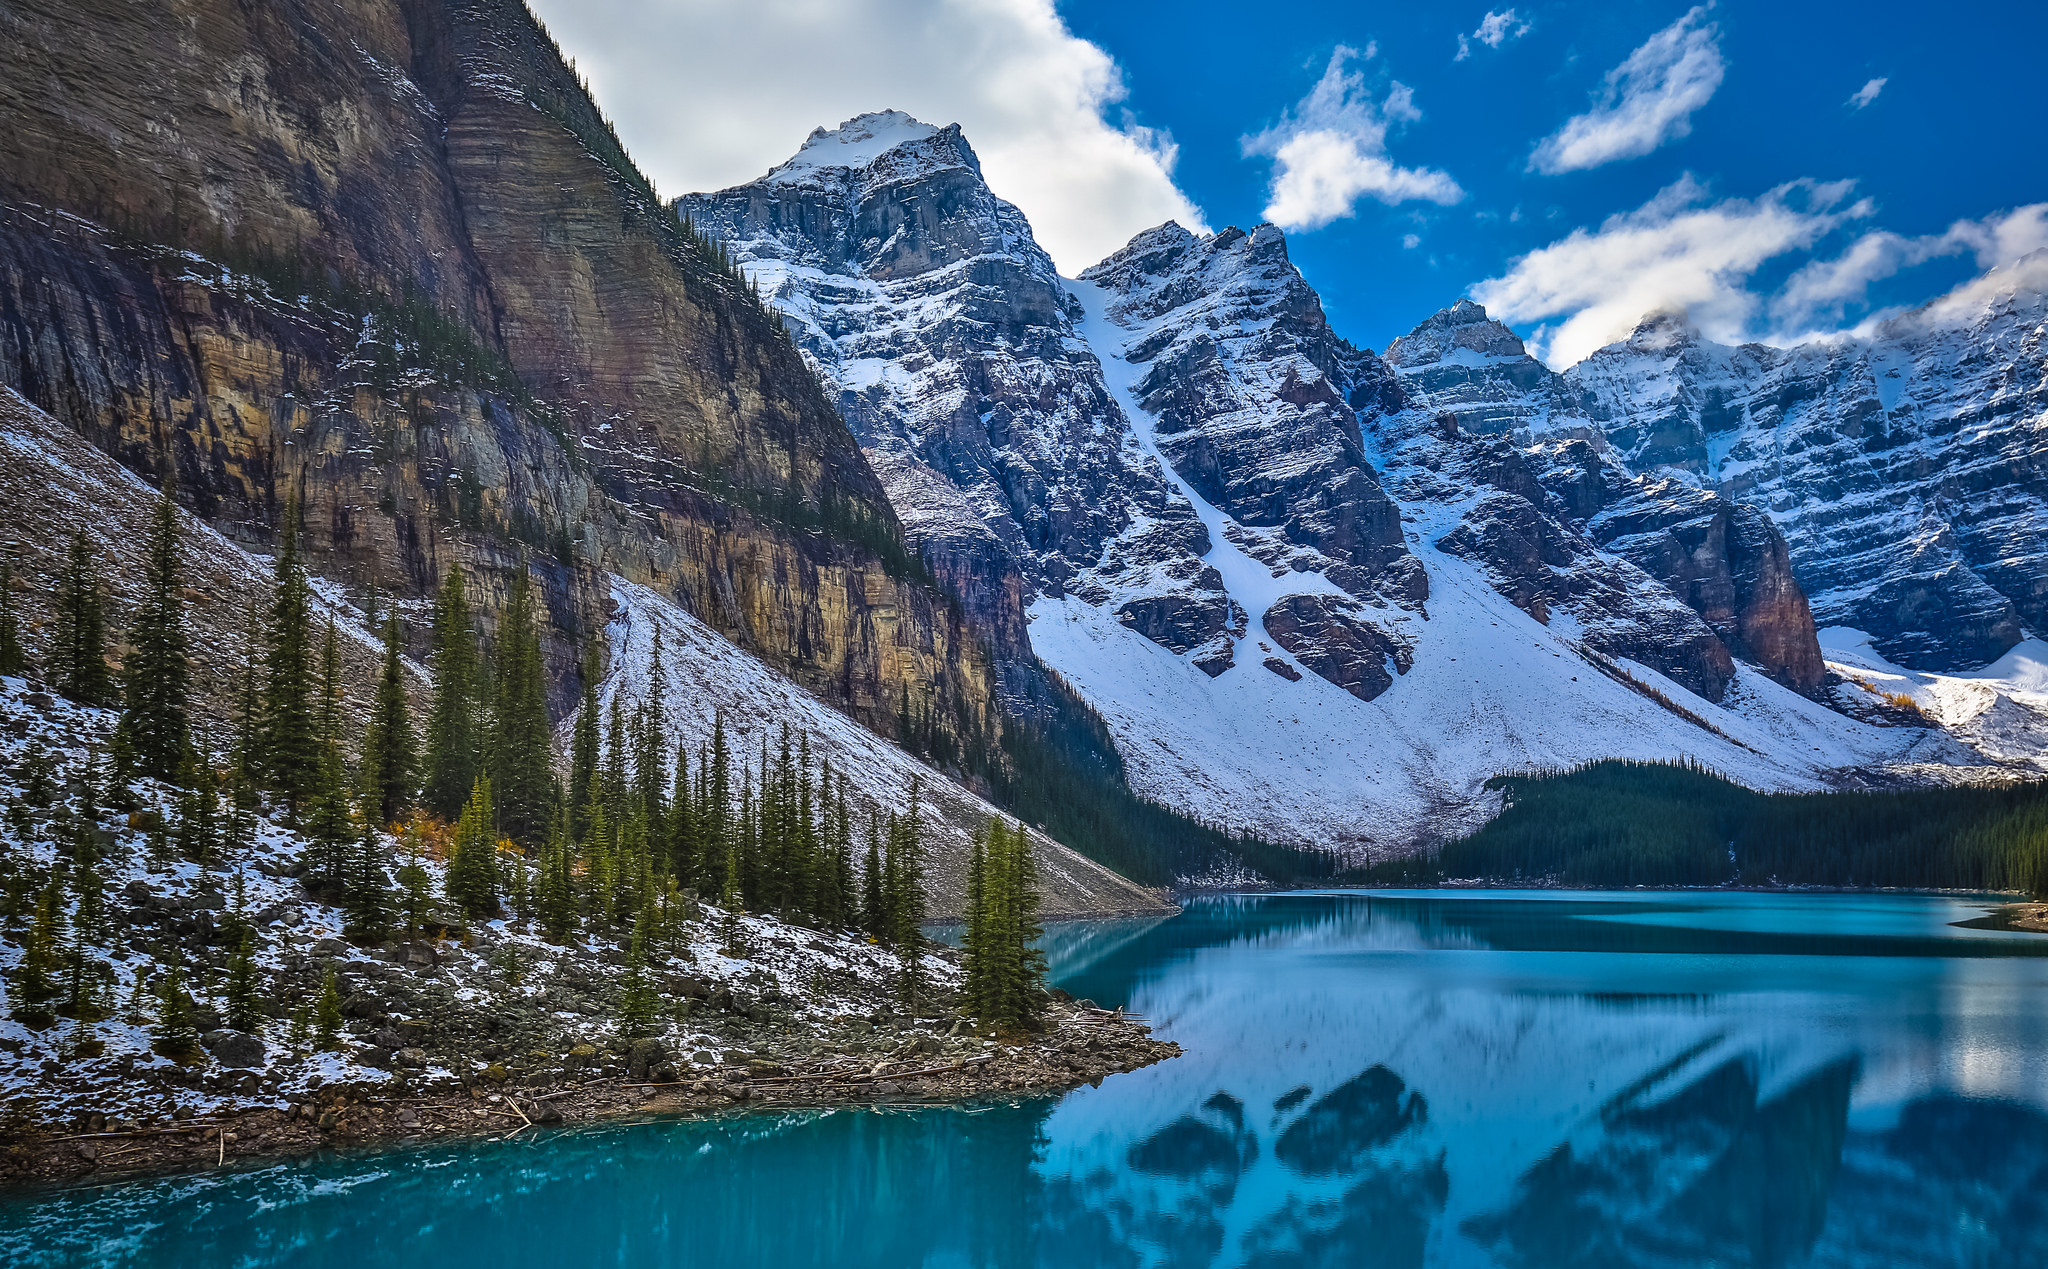 Wallpapers Canada rocks mountains on the desktop